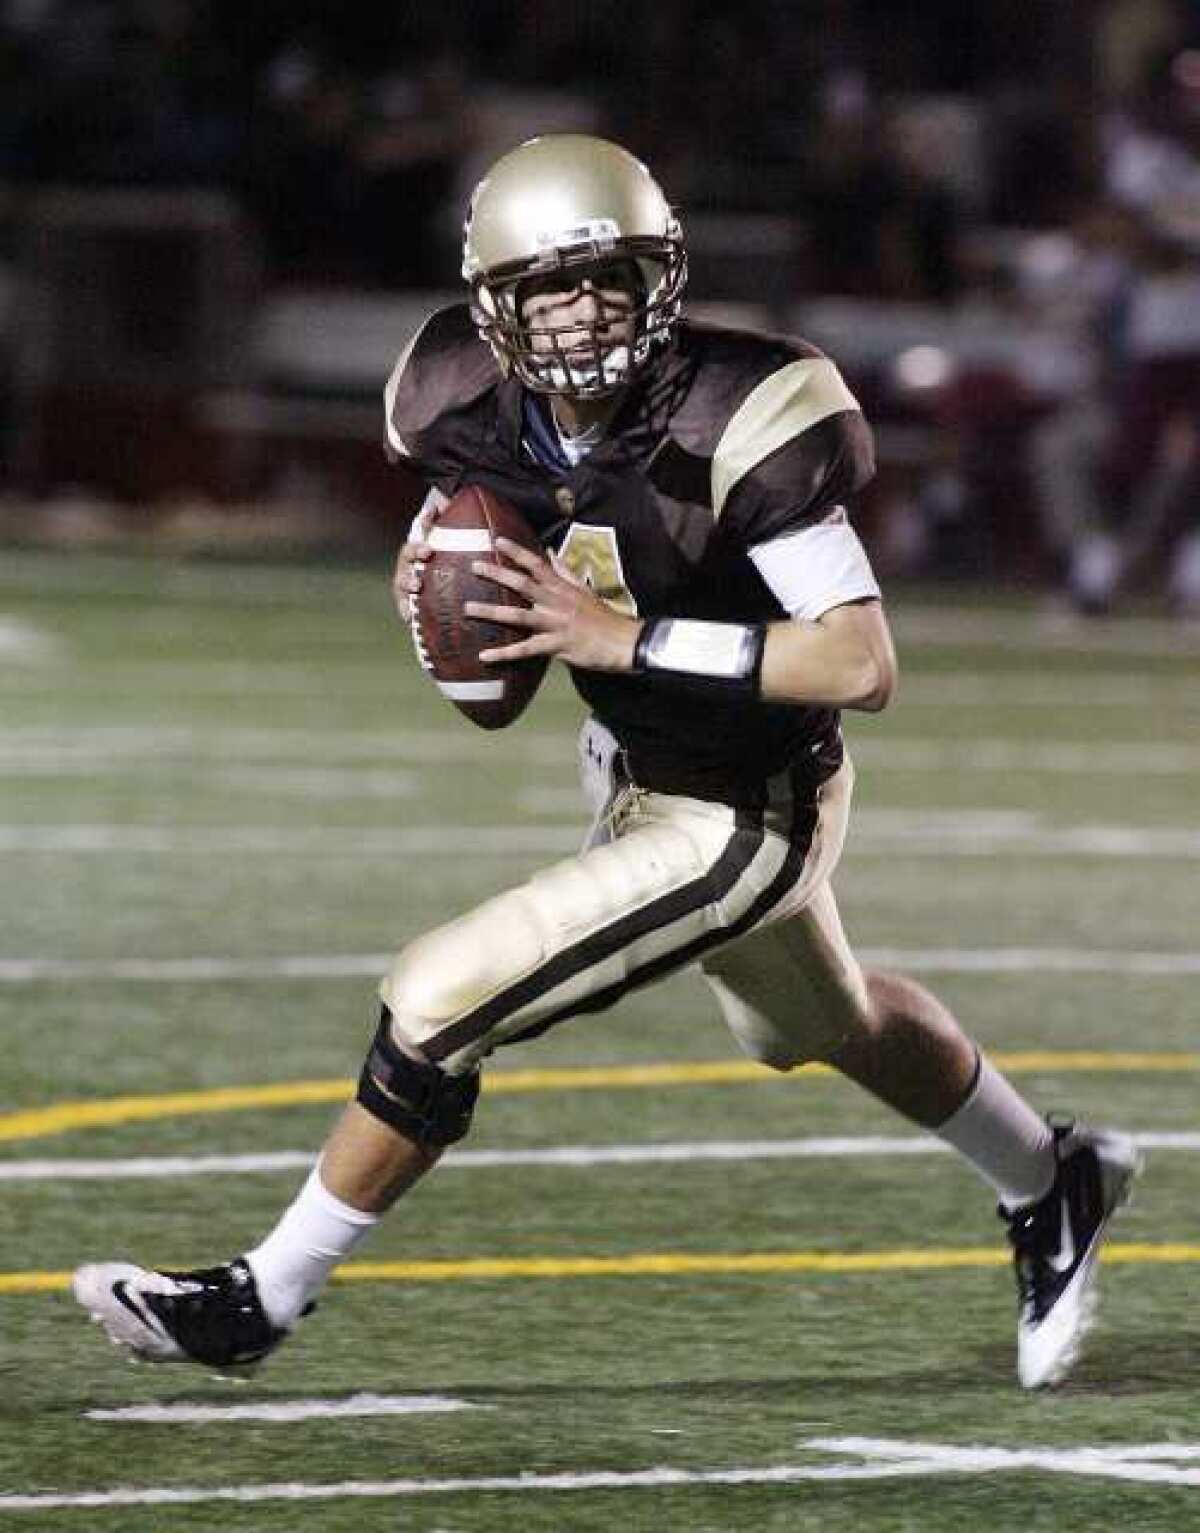 ARCHIVE PHOTO: St. Francis quarterback Jared Lebowitz rolls out to find a receiver against Arcadia.